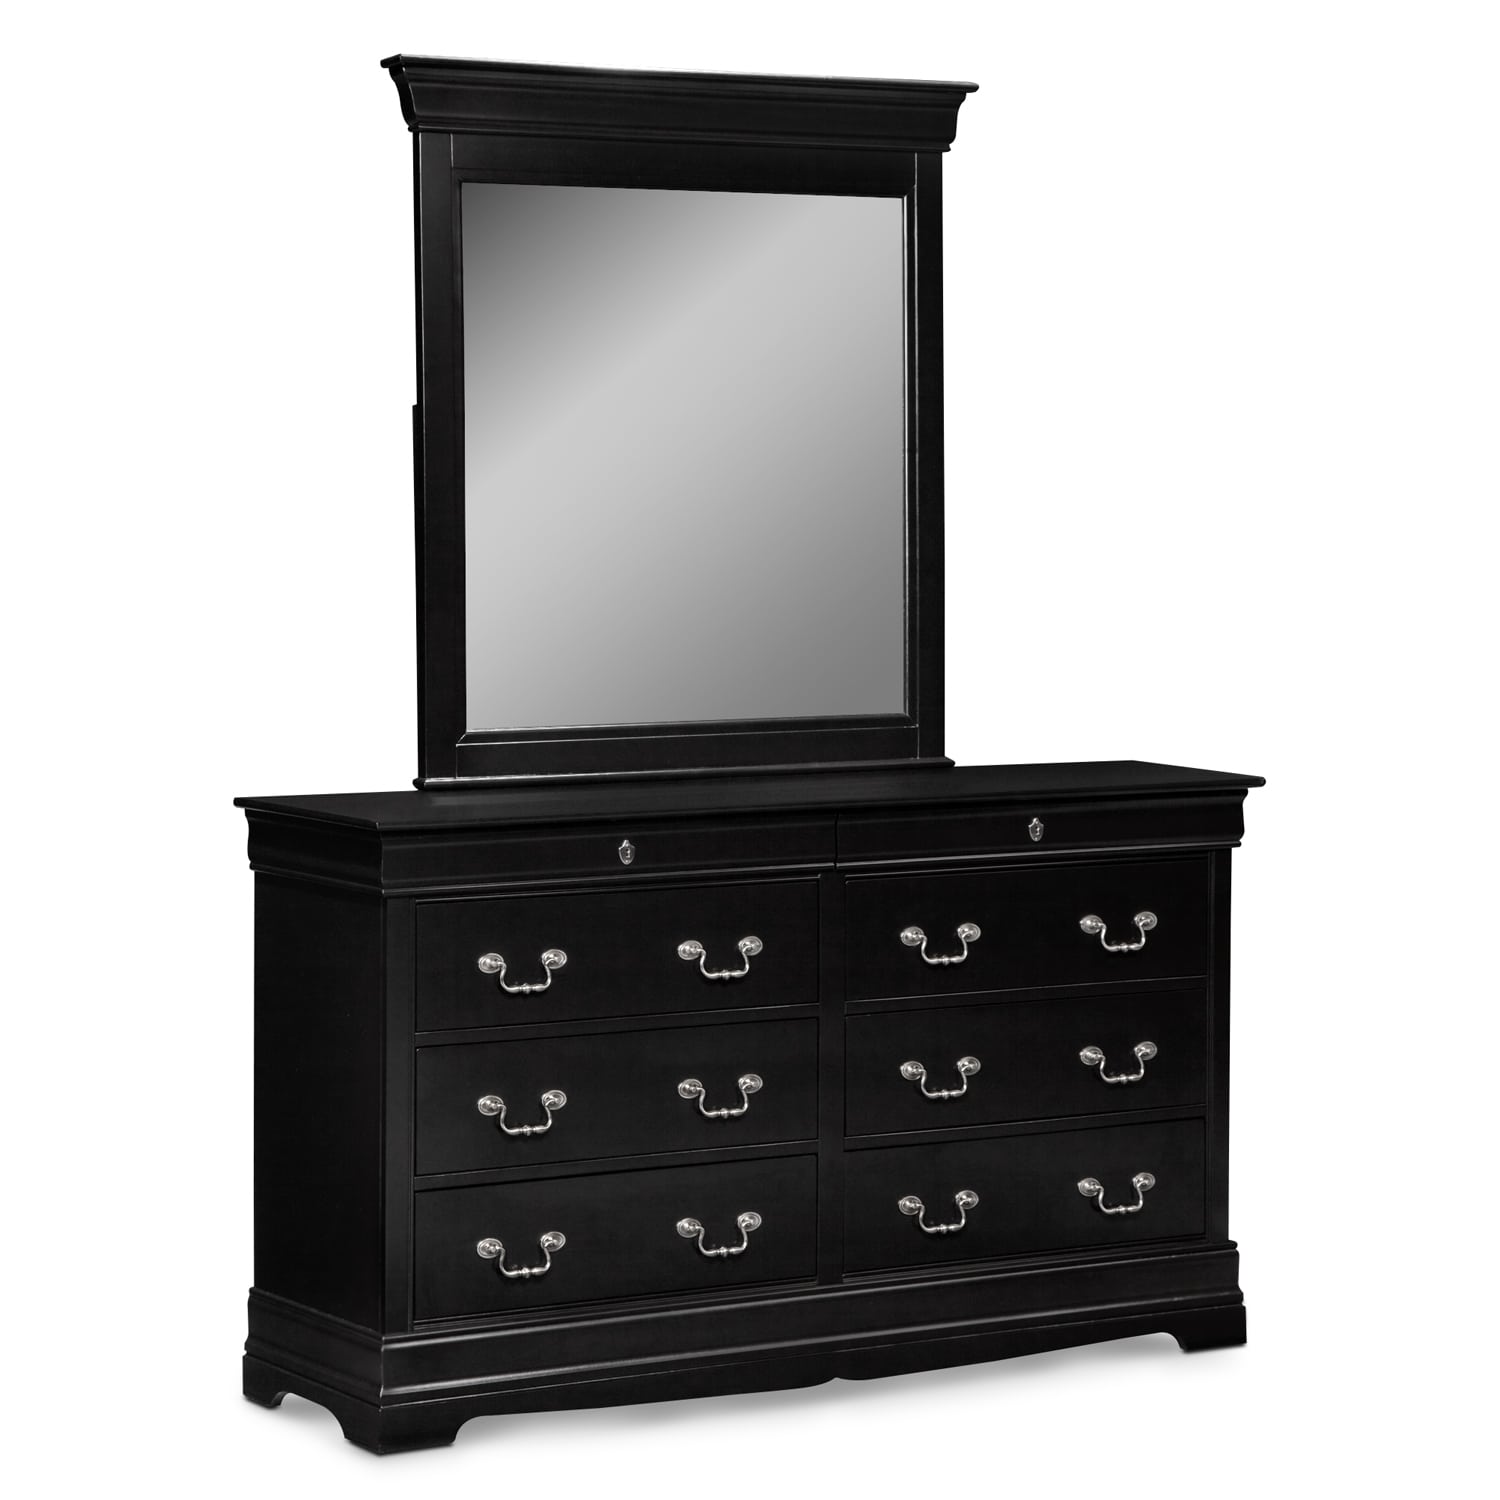 Neo Classic Dresser And Mirror Value City Furniture And Mattresses